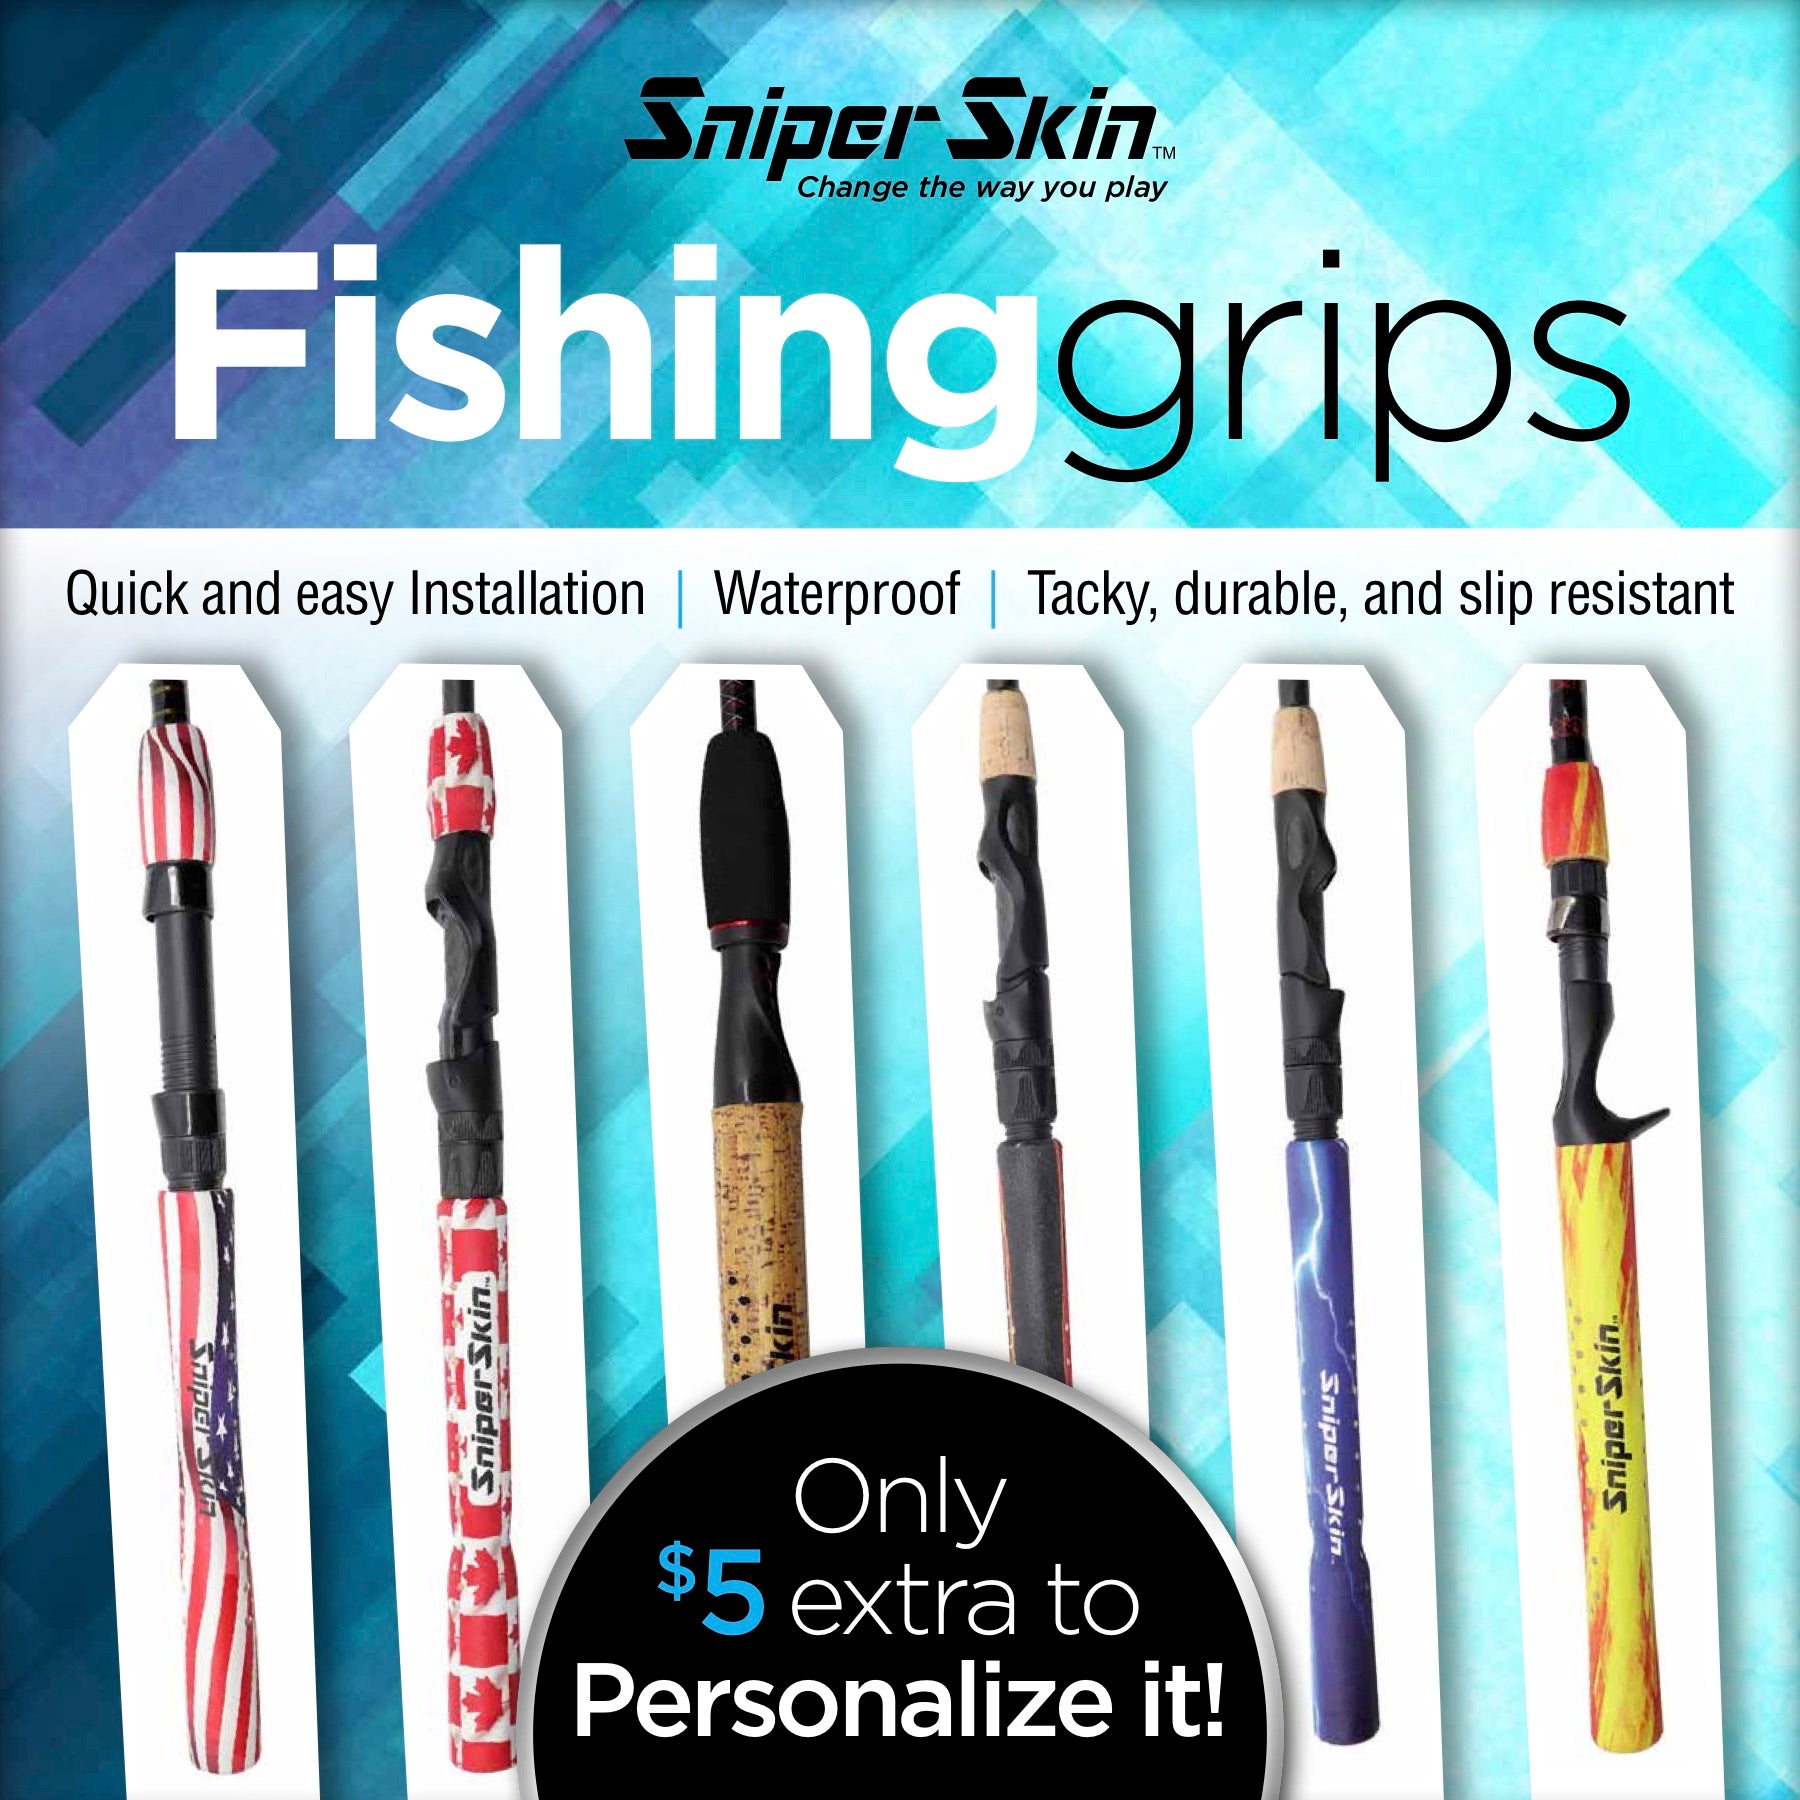 Sniper Skin Fishing Grips - Quick and easy installation - Waterproof - Tacky Durable and slip resistant